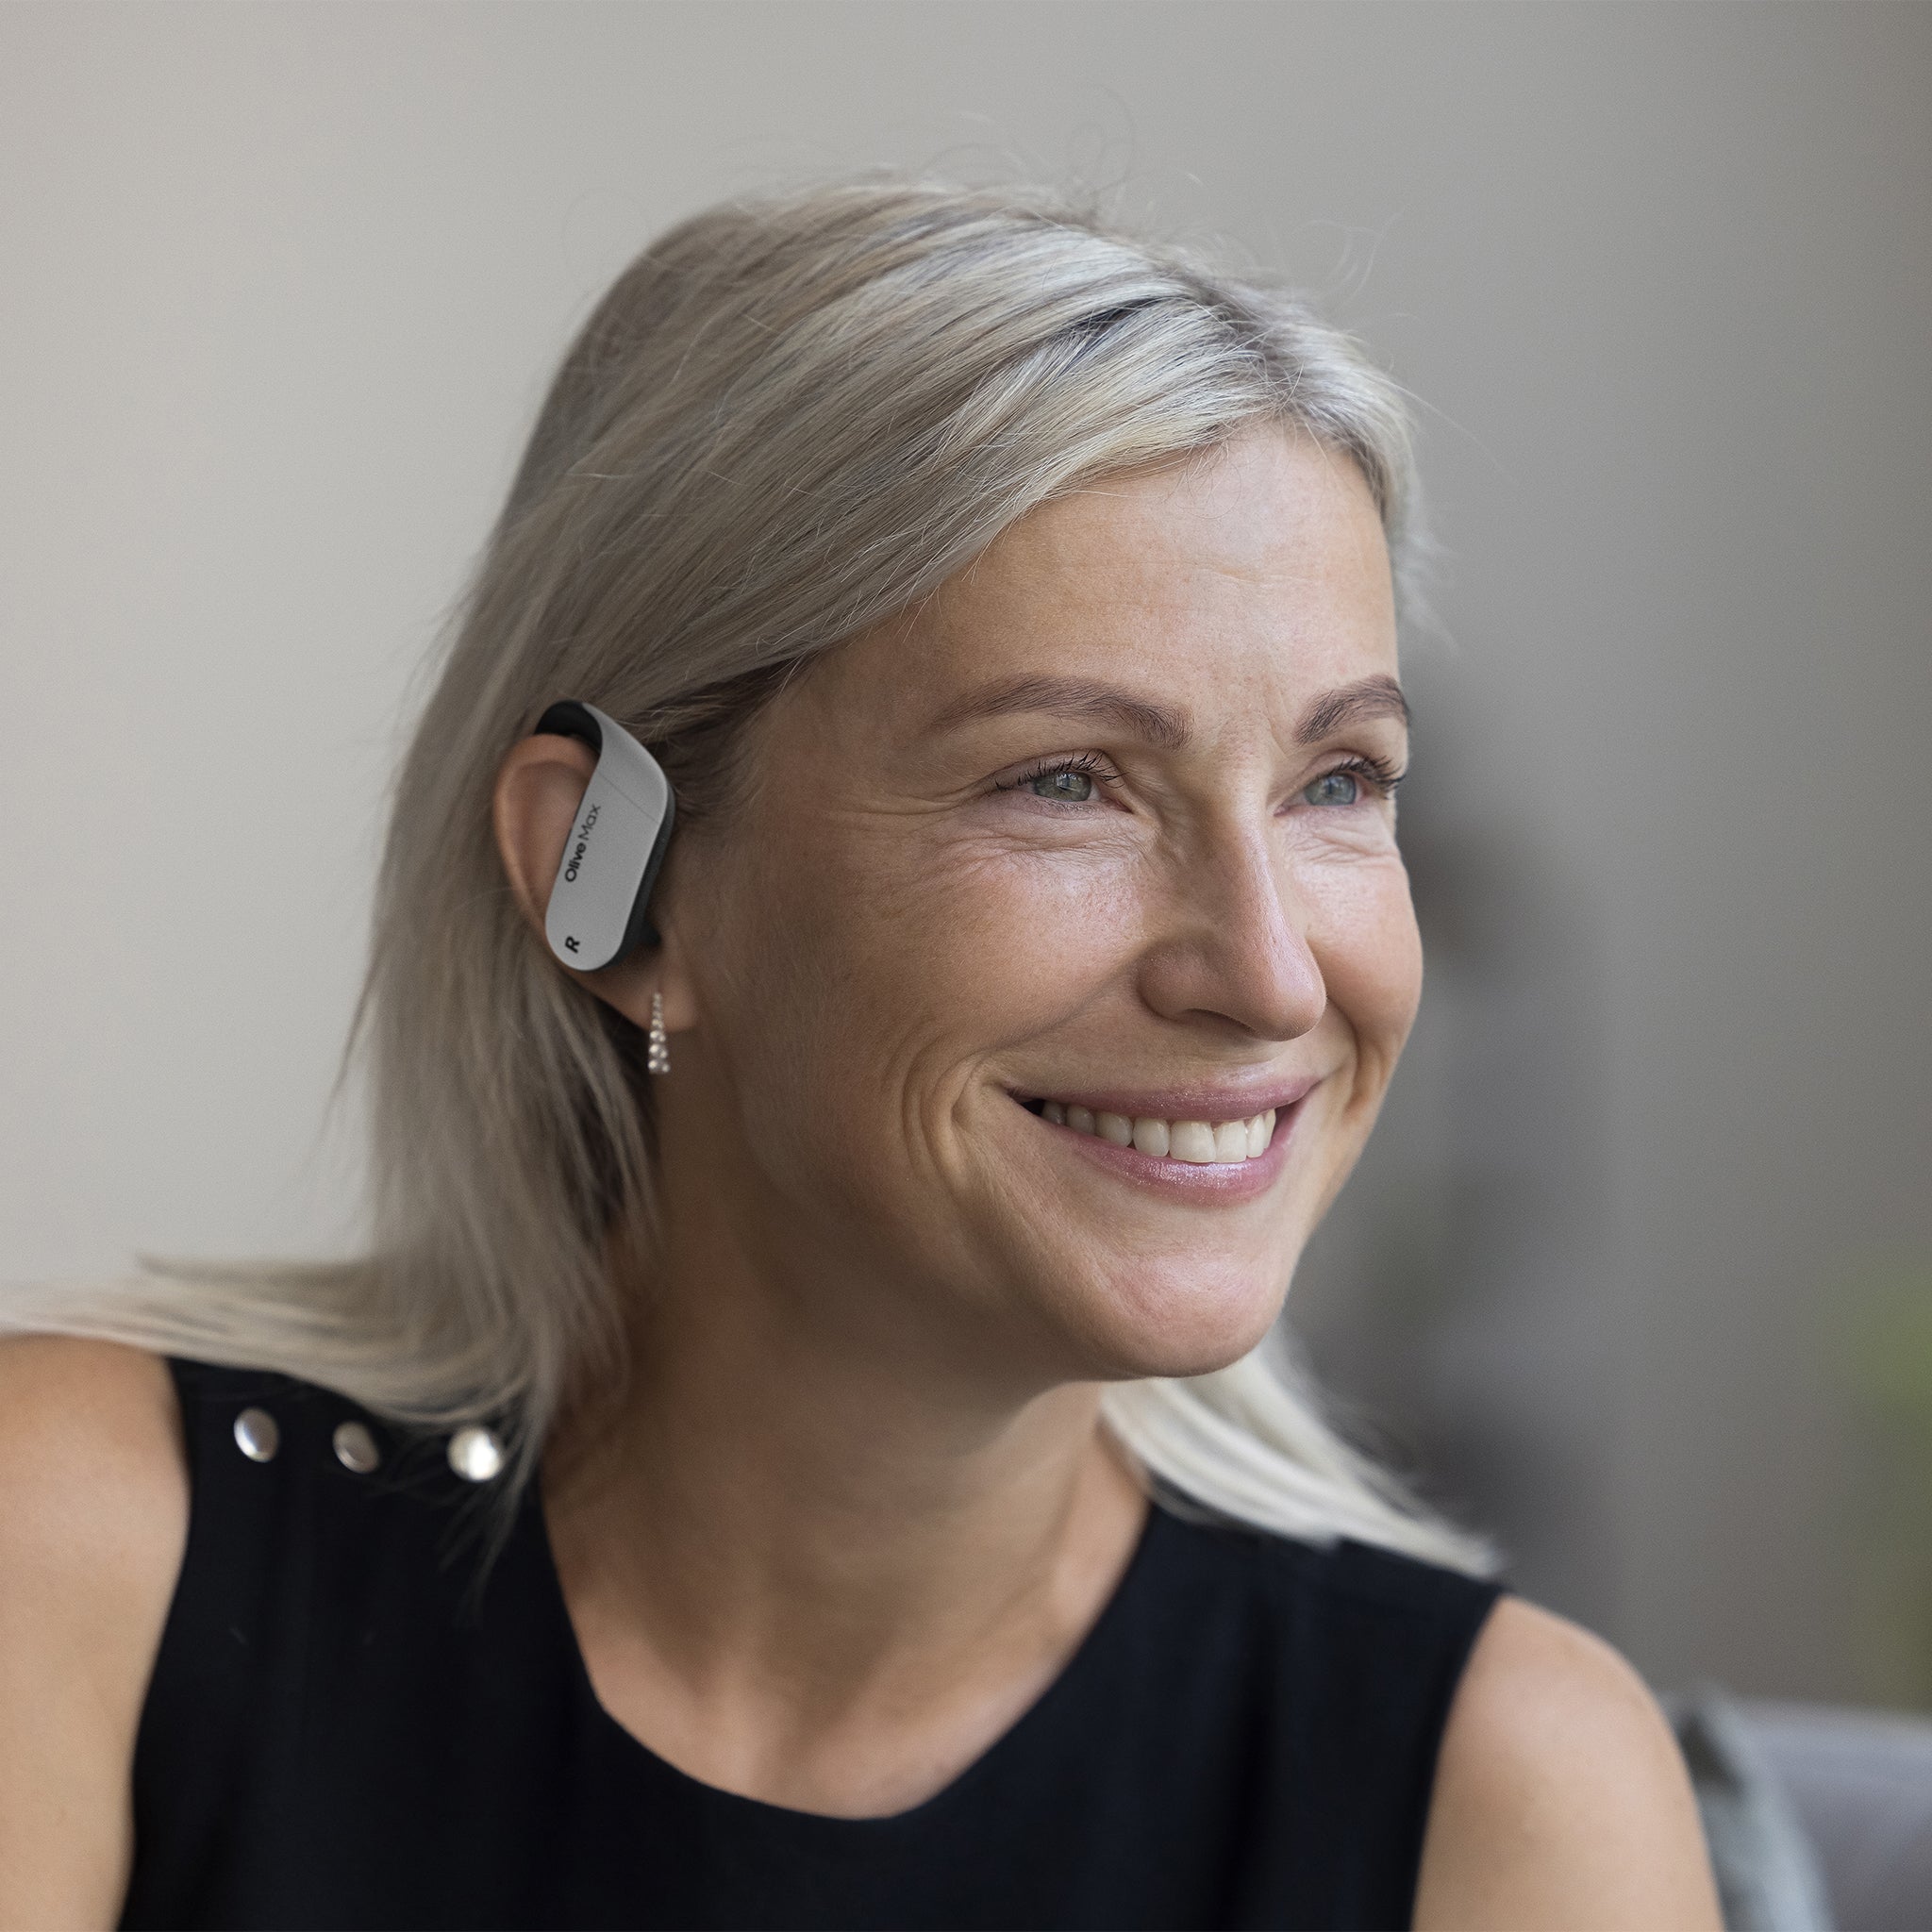 whieHappy lady with white hair smiles as she enjoys improved sound with Olive max hearing aids.